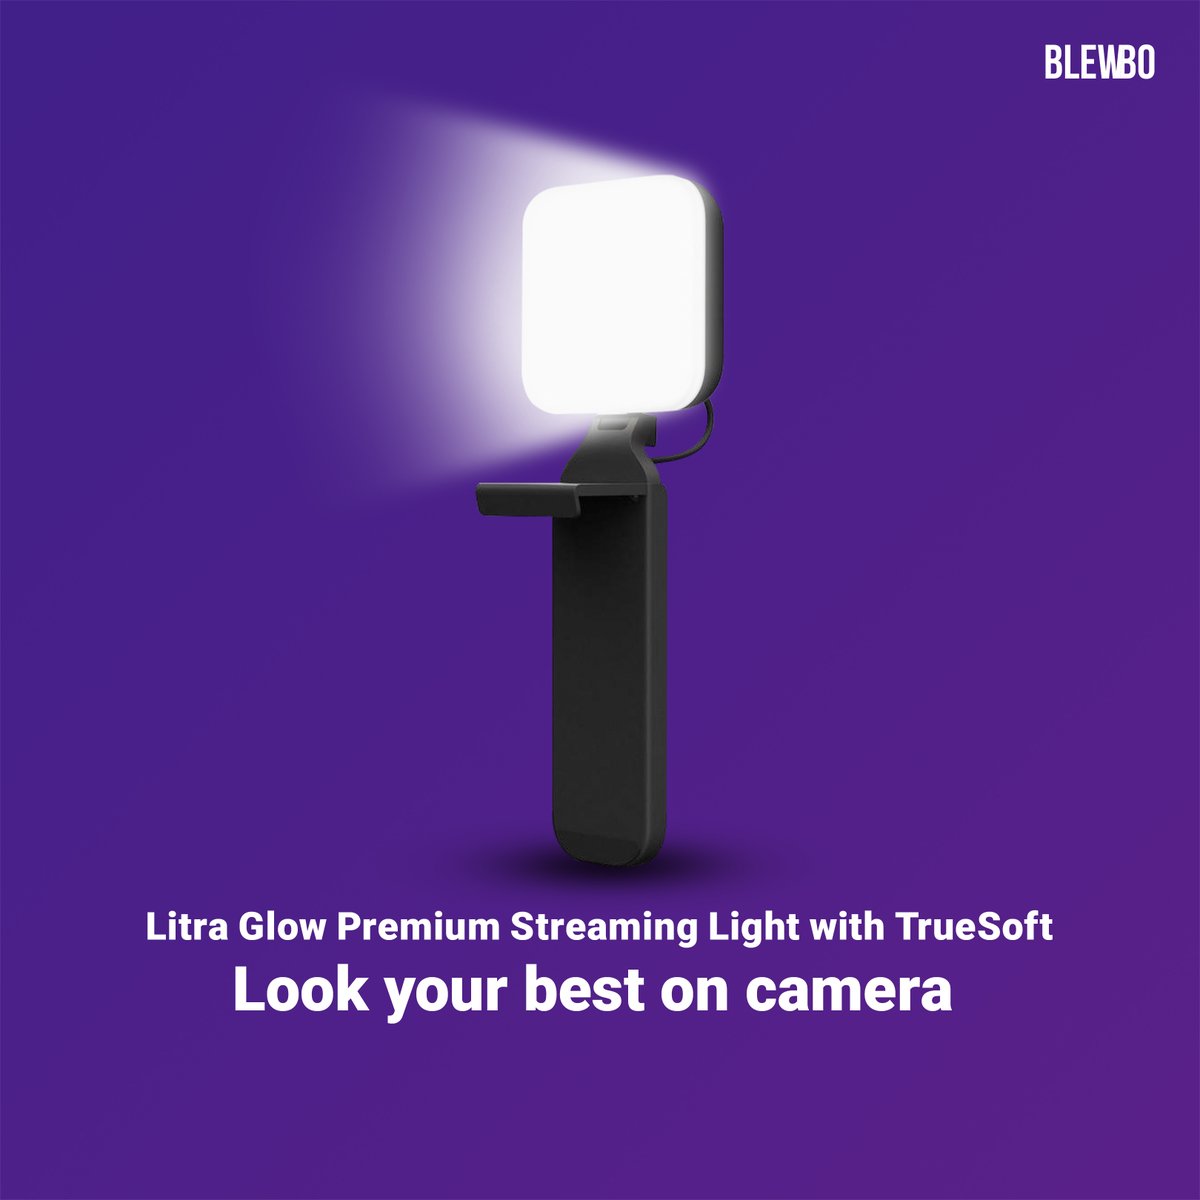 Illuminate your life and look your best on camera with the Litra Glow Premium Streaming Light. Featuring TrueSoft technology, this light delivers natural and flattering lighting for any setting. #glowup #contentcreation #makeuplight #contenthacks  #forsale  #studiolight #light